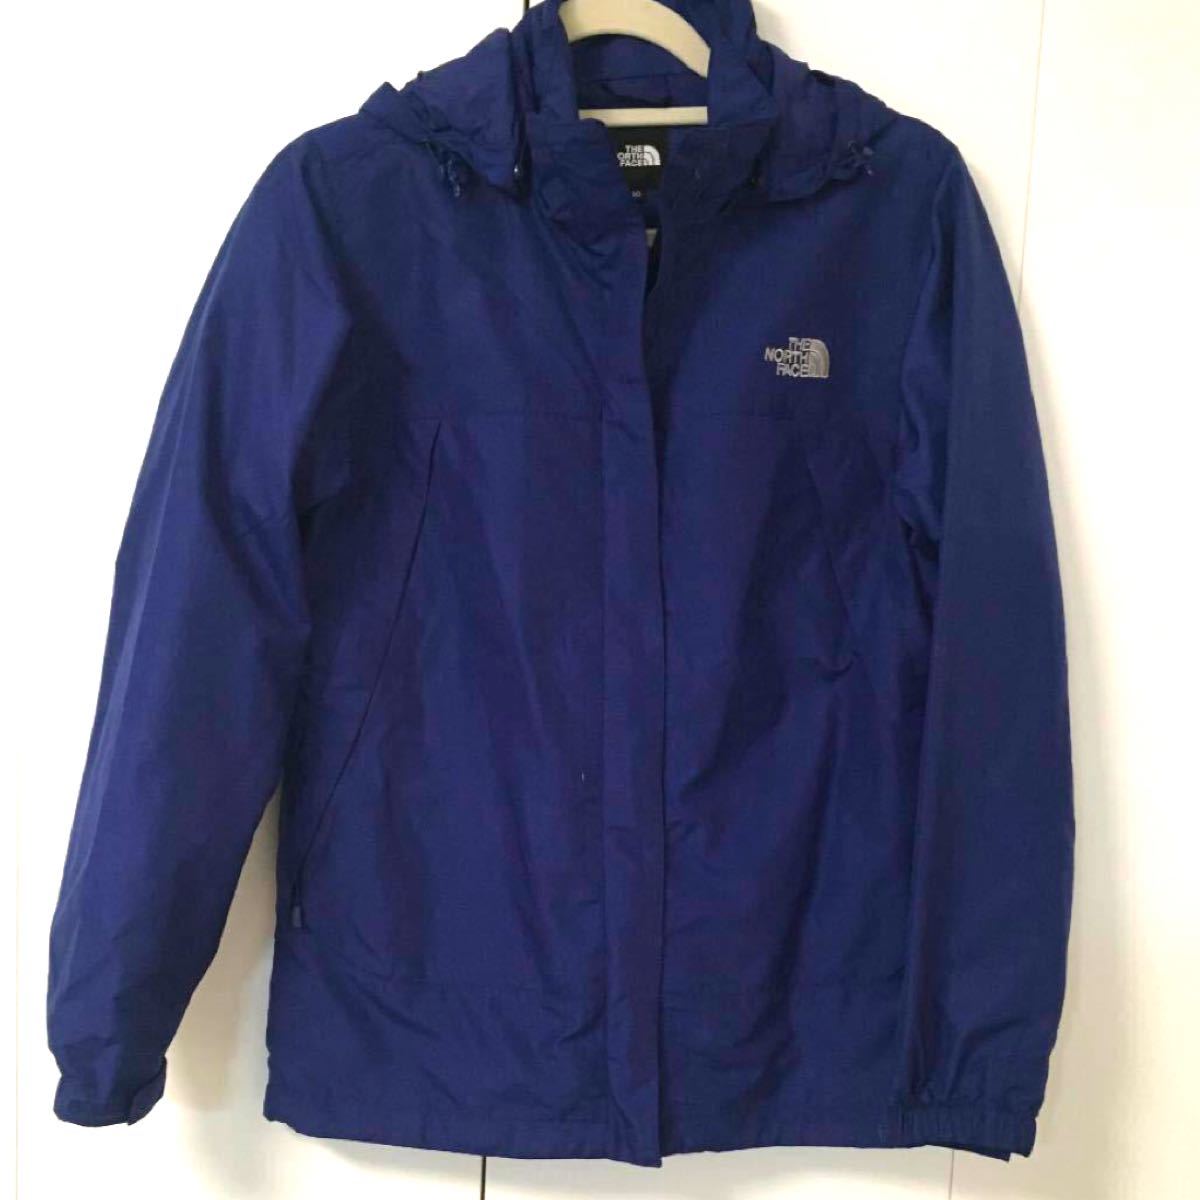 THE NORTH FACE ナイロンパーカー